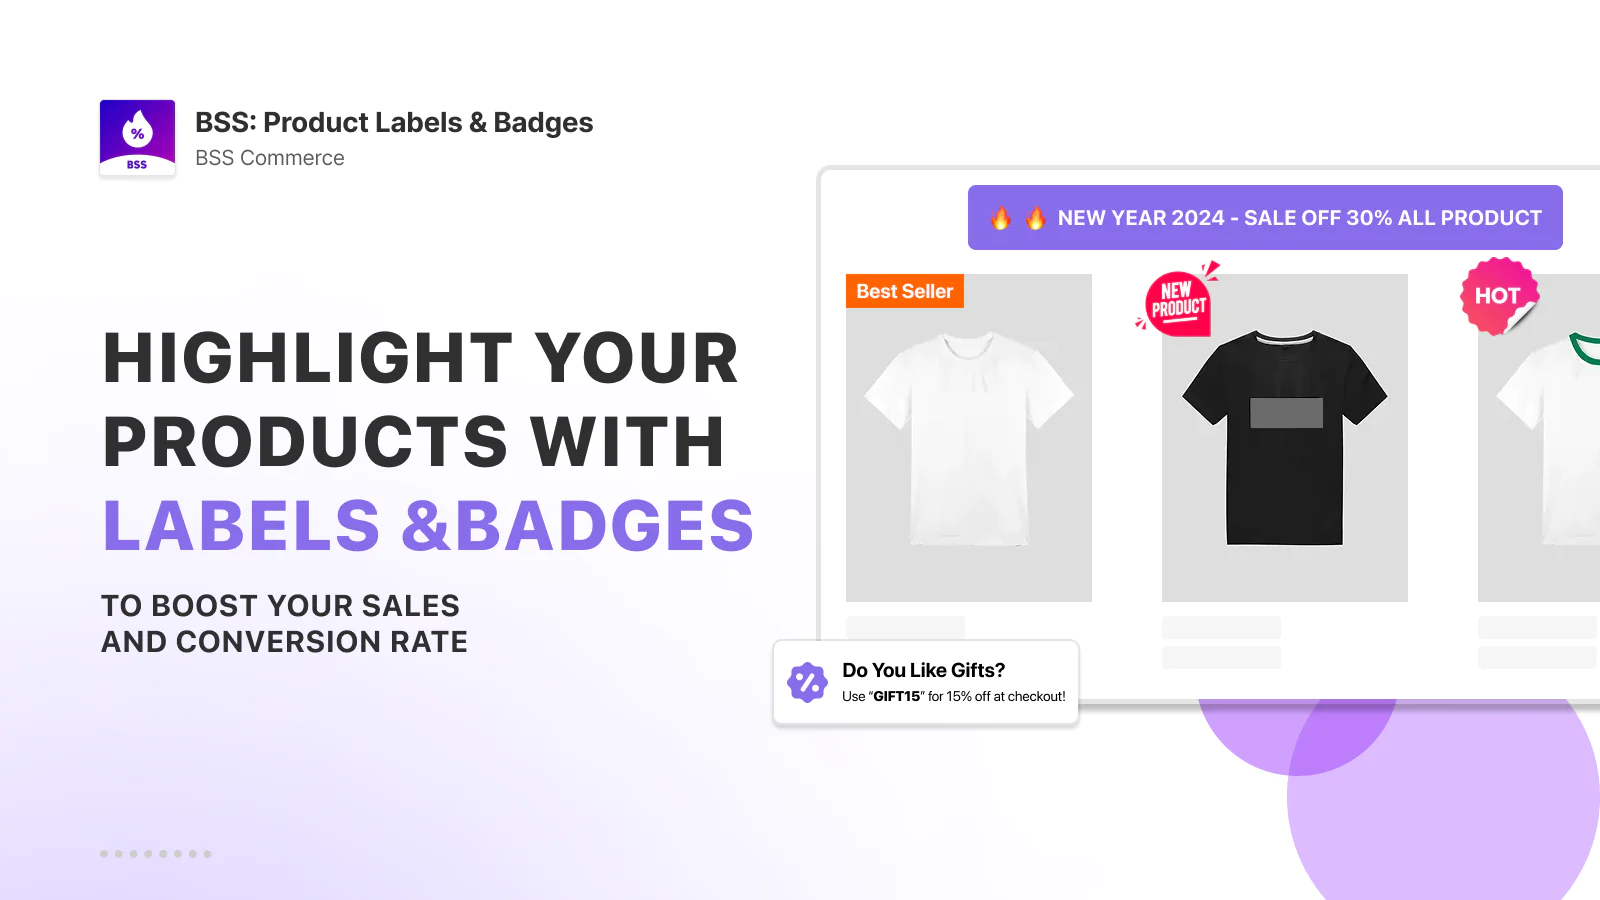 bss-product-labels-and-badges-highlight-products